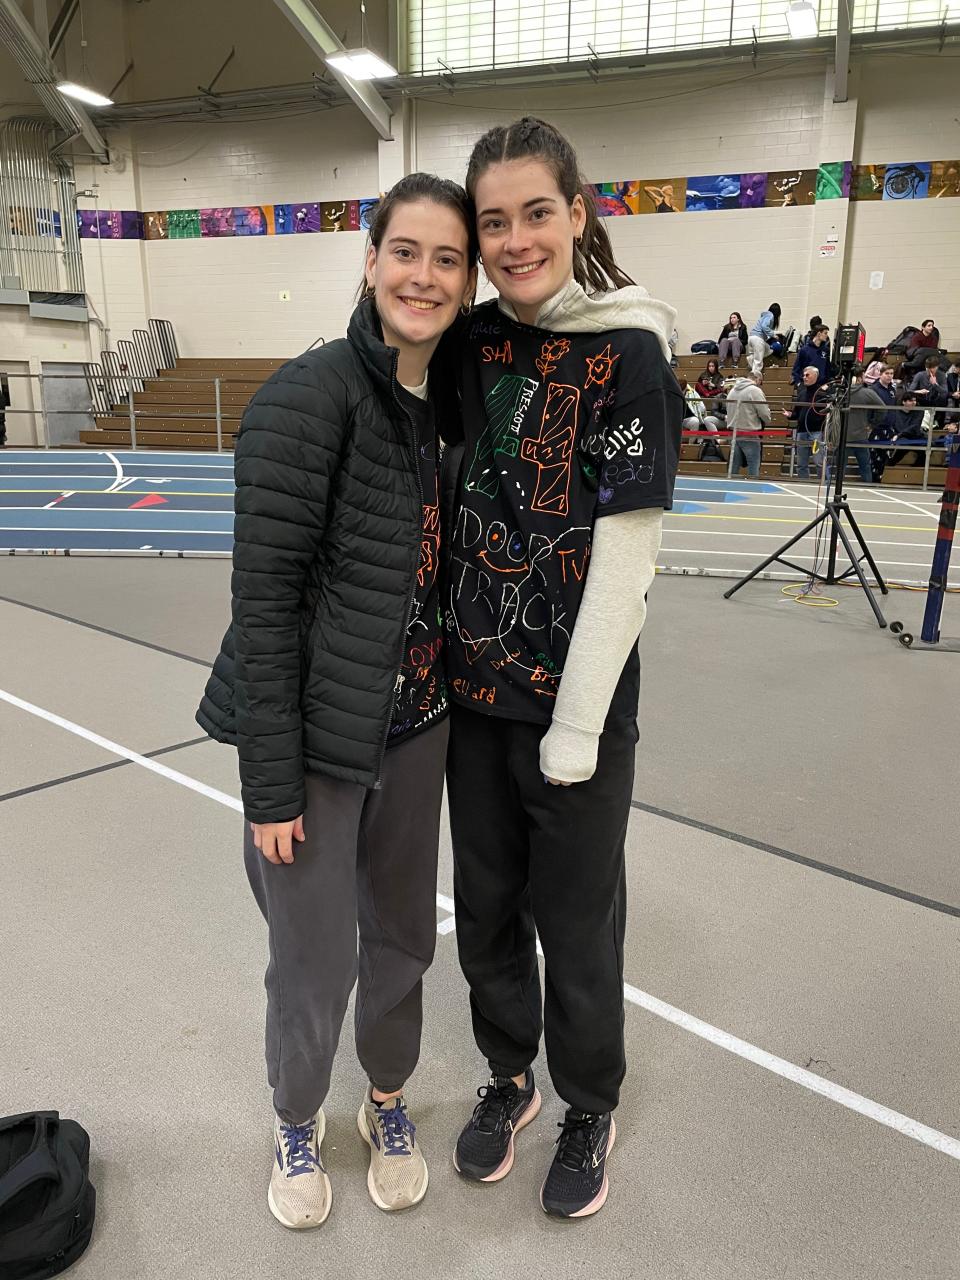 Hopkinton seniors Bridget and Keira O'Connor competed in a combined five events at Saturday's TVL Showcase. They placed third and seventh, respectively, in the high jump.